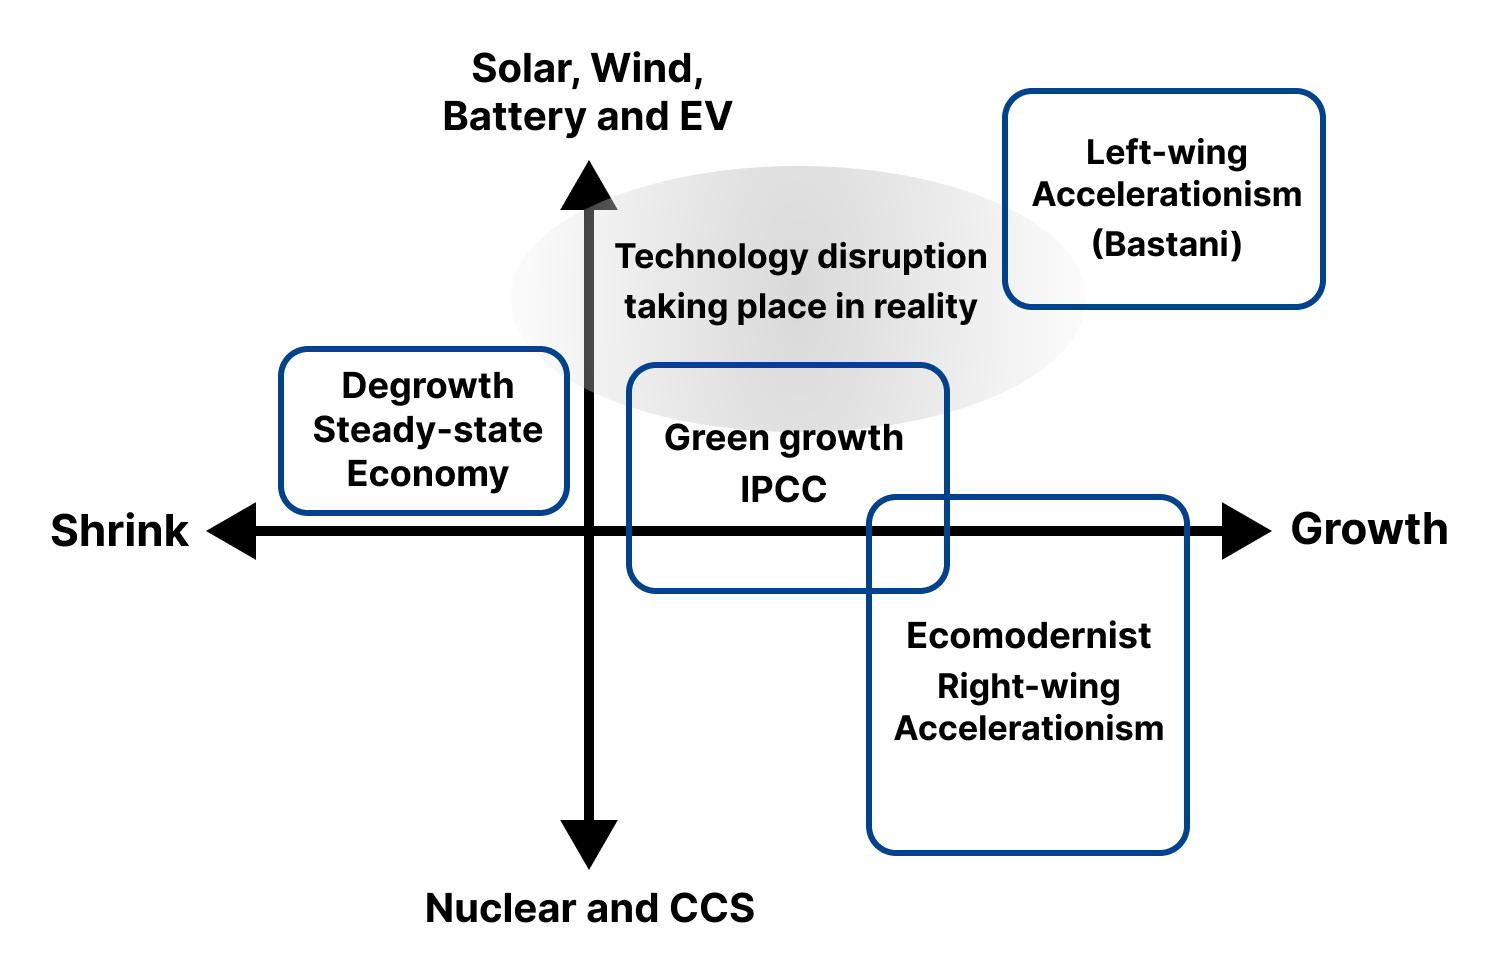 Figure 1. Positioning of Degrowth Theory, Green Growth, and Technology Disruption